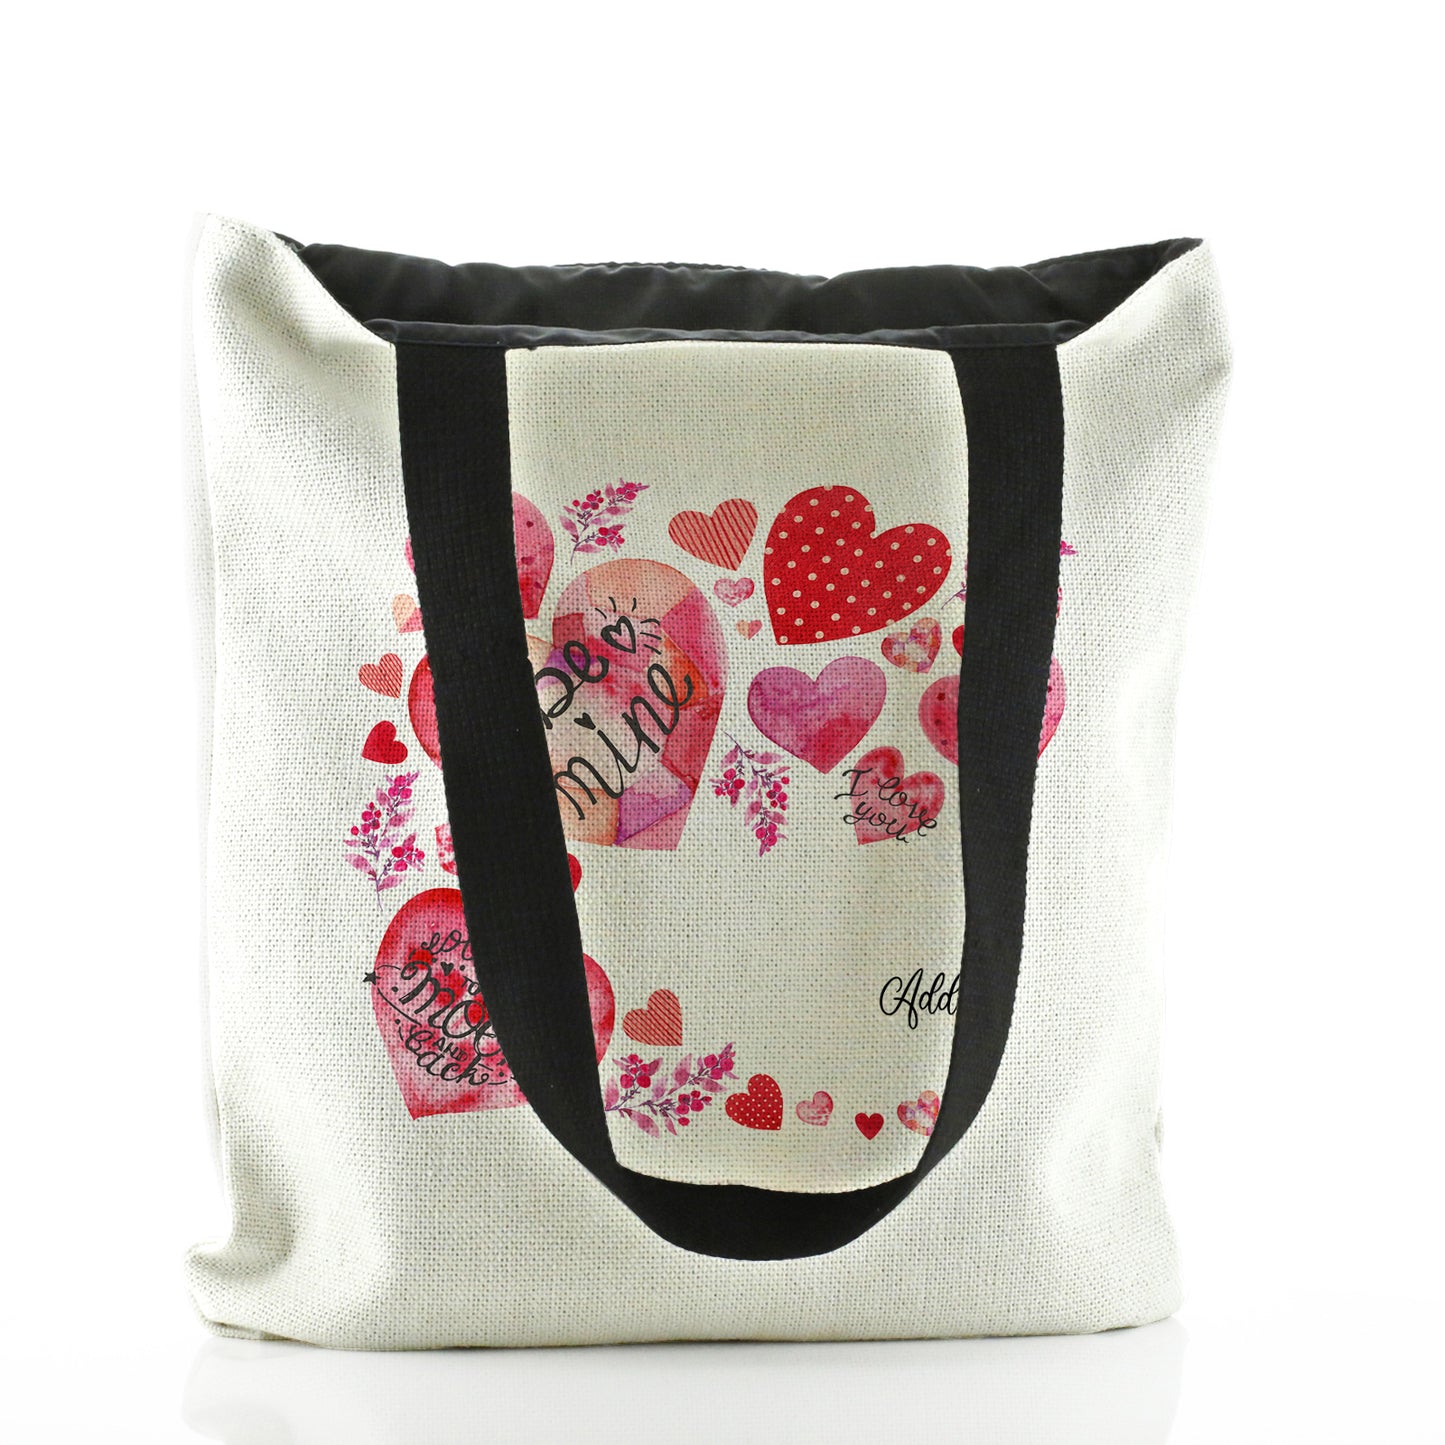 Personalised White Tote Bag with Stylish Text and Material Hearts Love Message Print